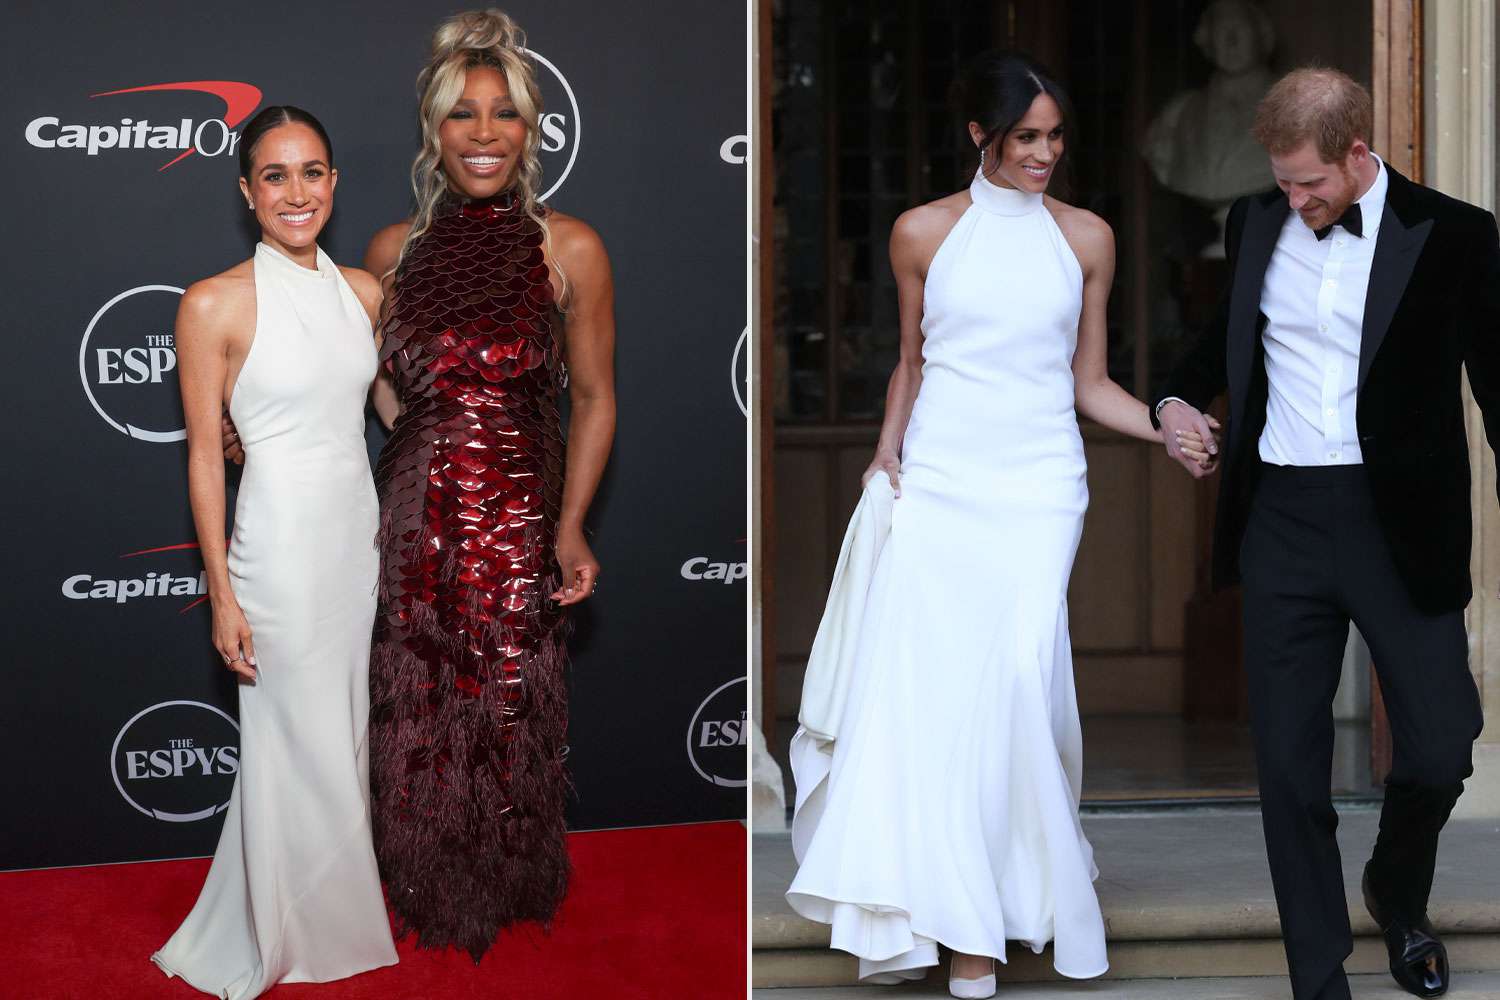 Meghan Markle Sparks Double Take in ESPYs Dress That Looks Upcycled from Her Wedding Reception Gown